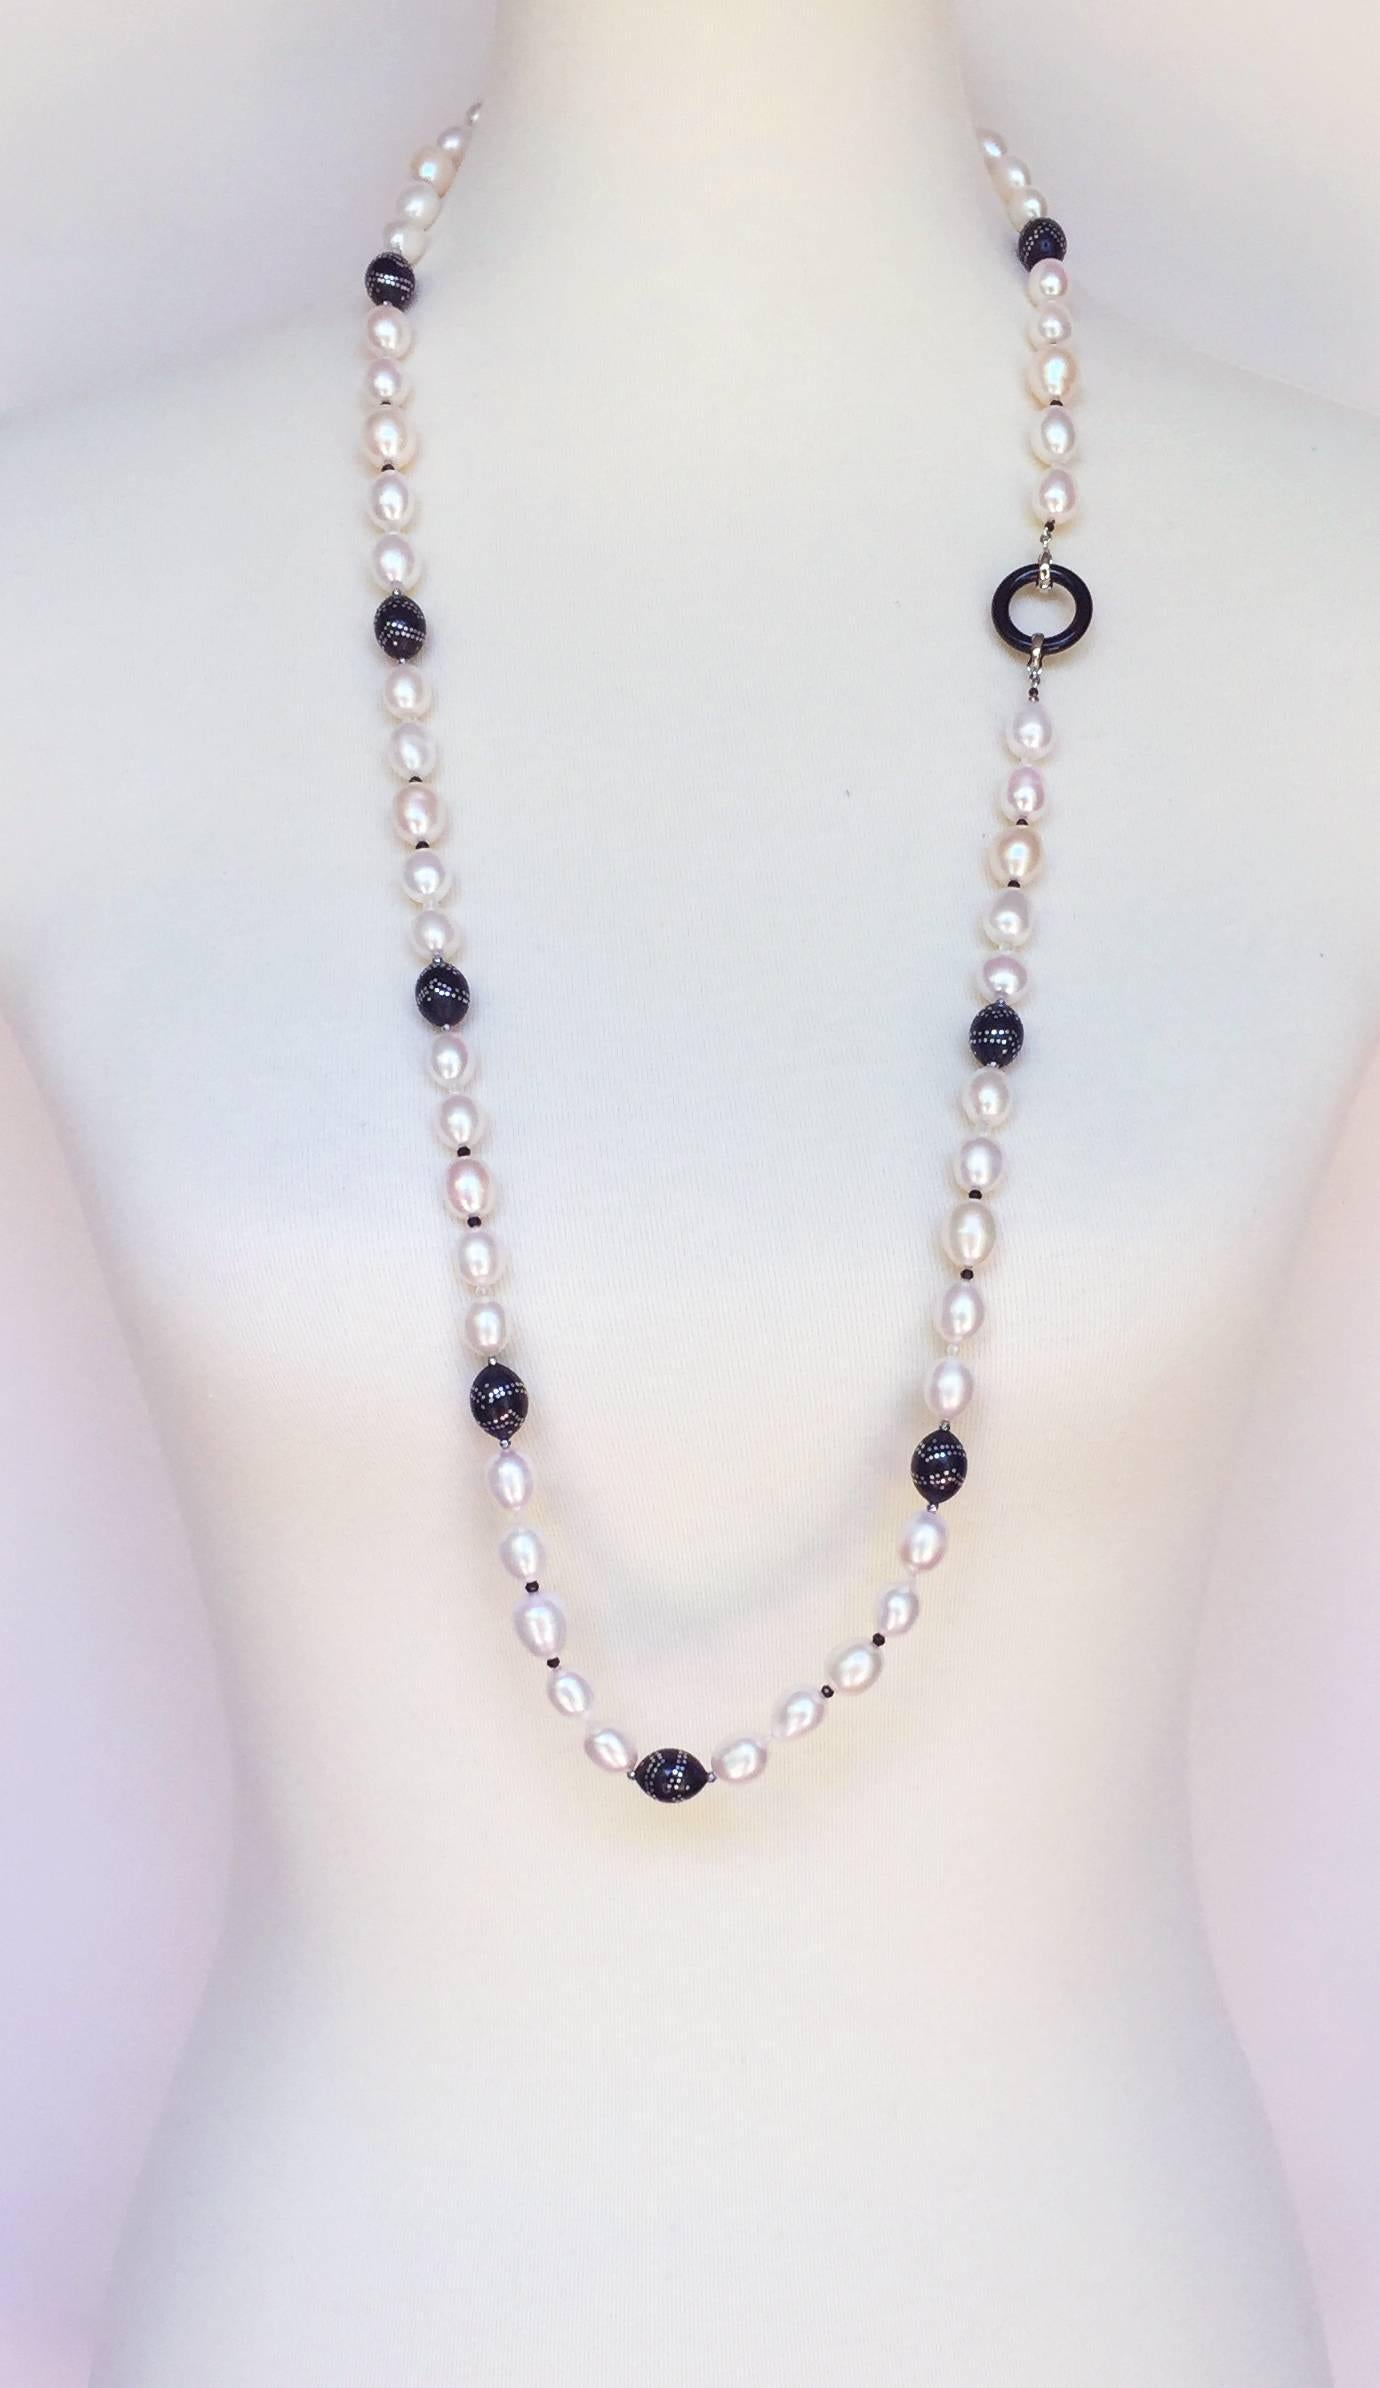 This necklace is made of large oval pearls accented with handmade antique wooden beads with silver inlay. The removable tassel stands out with a large pearl sitting on a diamond encrusted rhondel and onyx rhondel, with graduated fine pearls